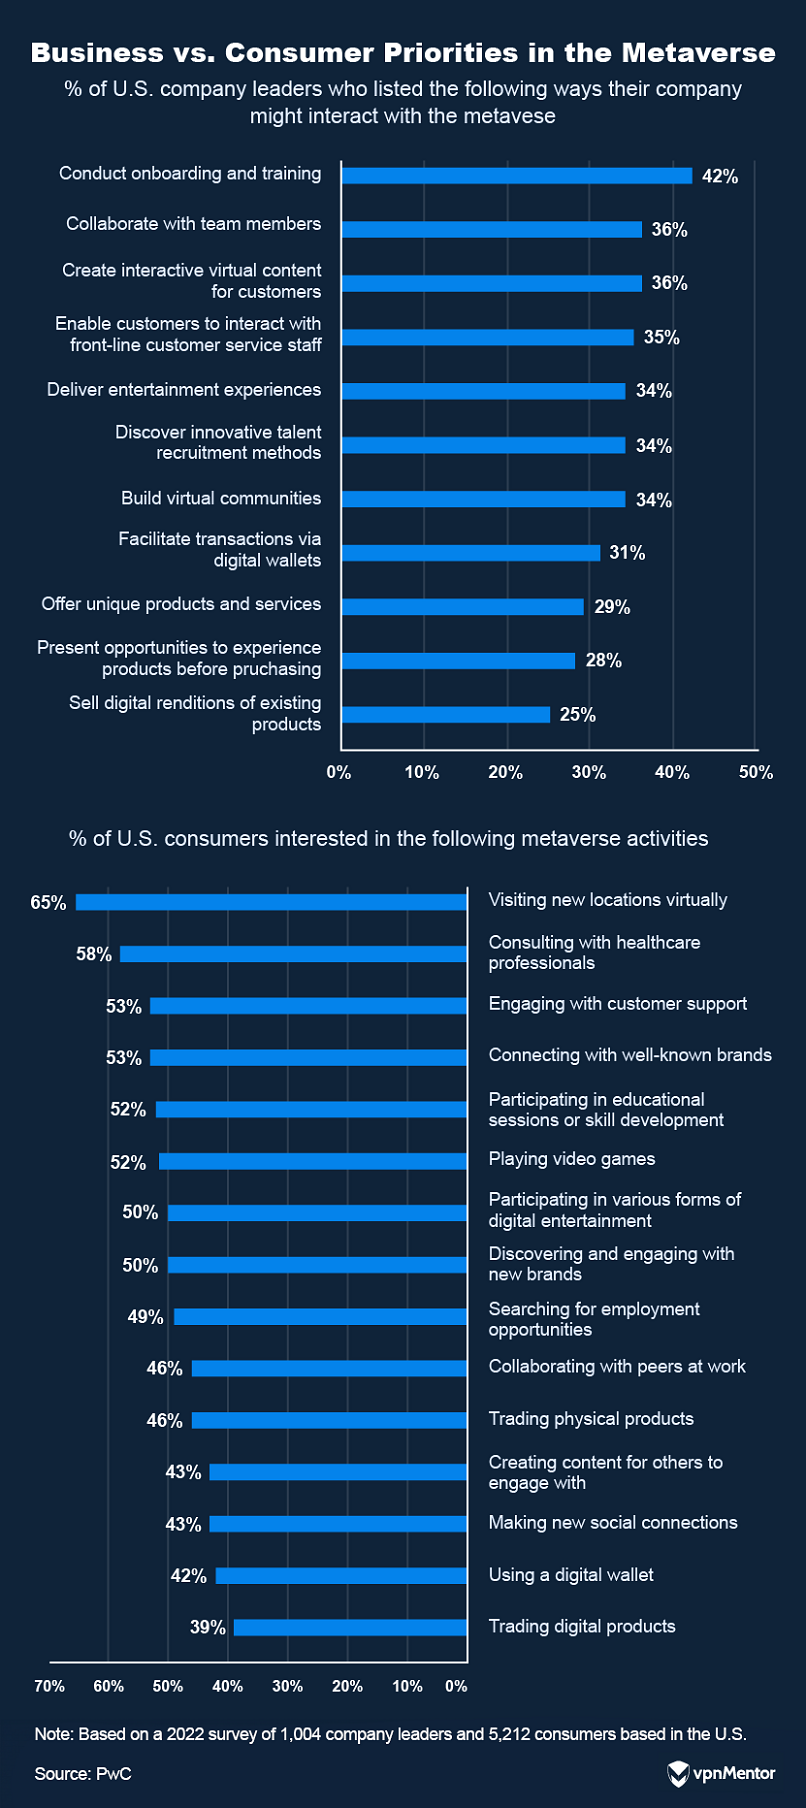 Stats about businesses intended uses of the metaverse vs those of consumers